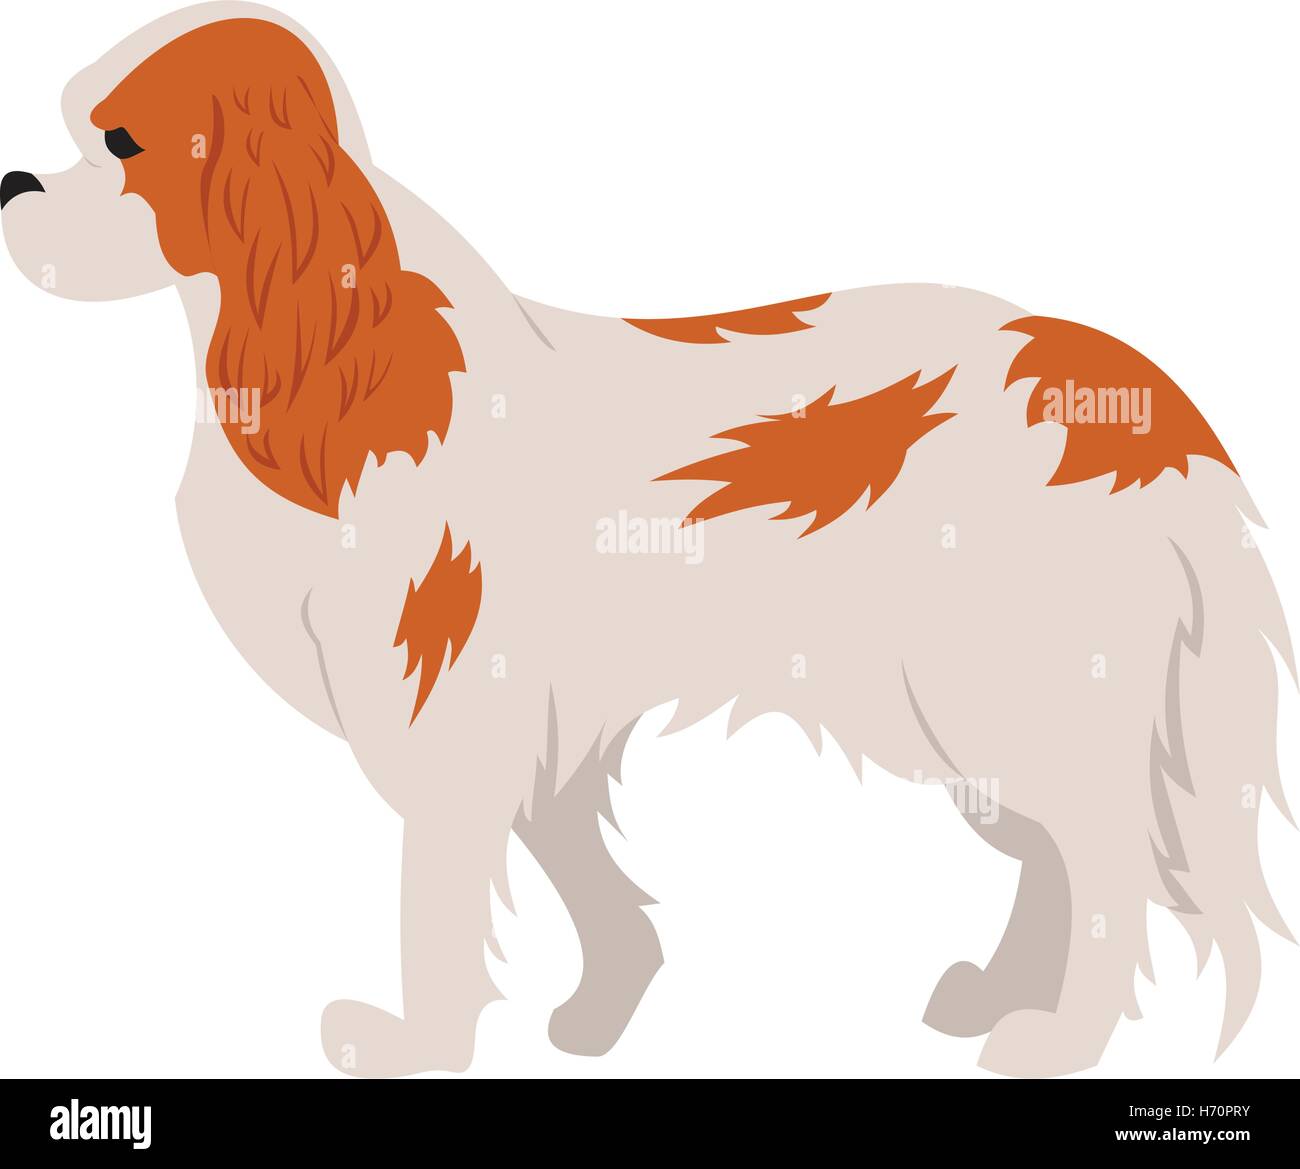 Cavalier king charles spaniel hound or dog and purebred animal, vector illustration Stock Vector